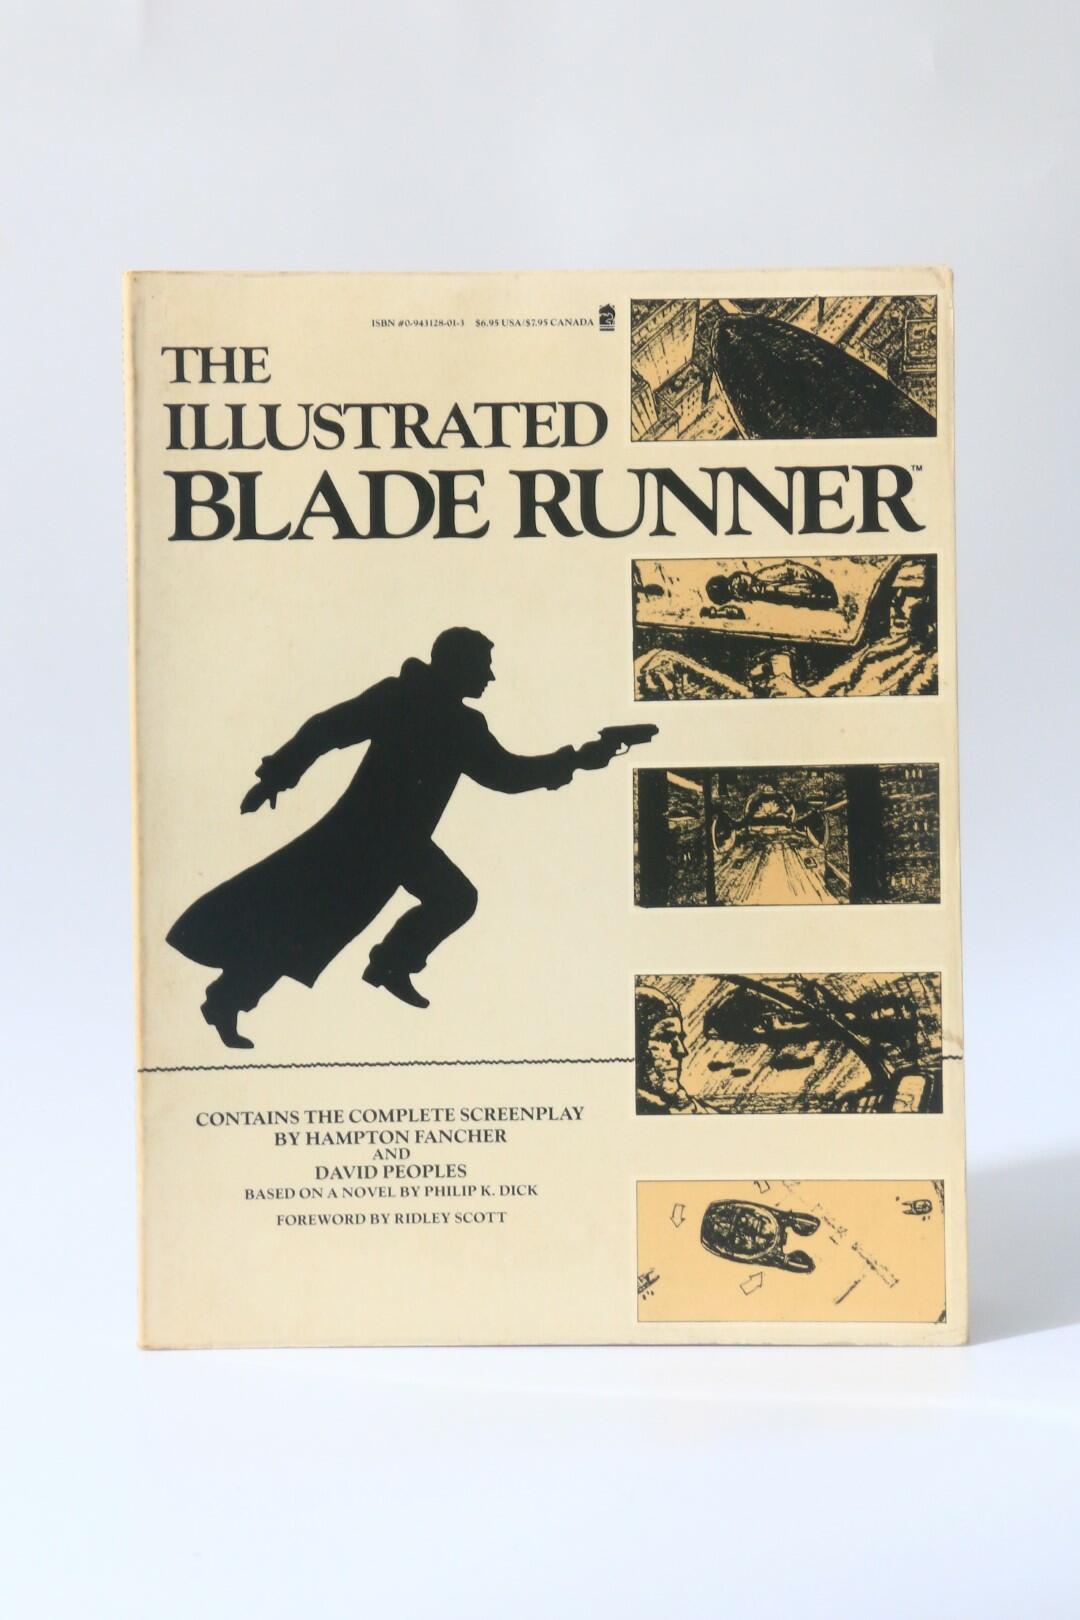 Hampton Fancher & David Peoples [ed. David Scroggy] - The Illustrated Blade Runner - Blue Dolphin Enterprises, 1982, First Edition.